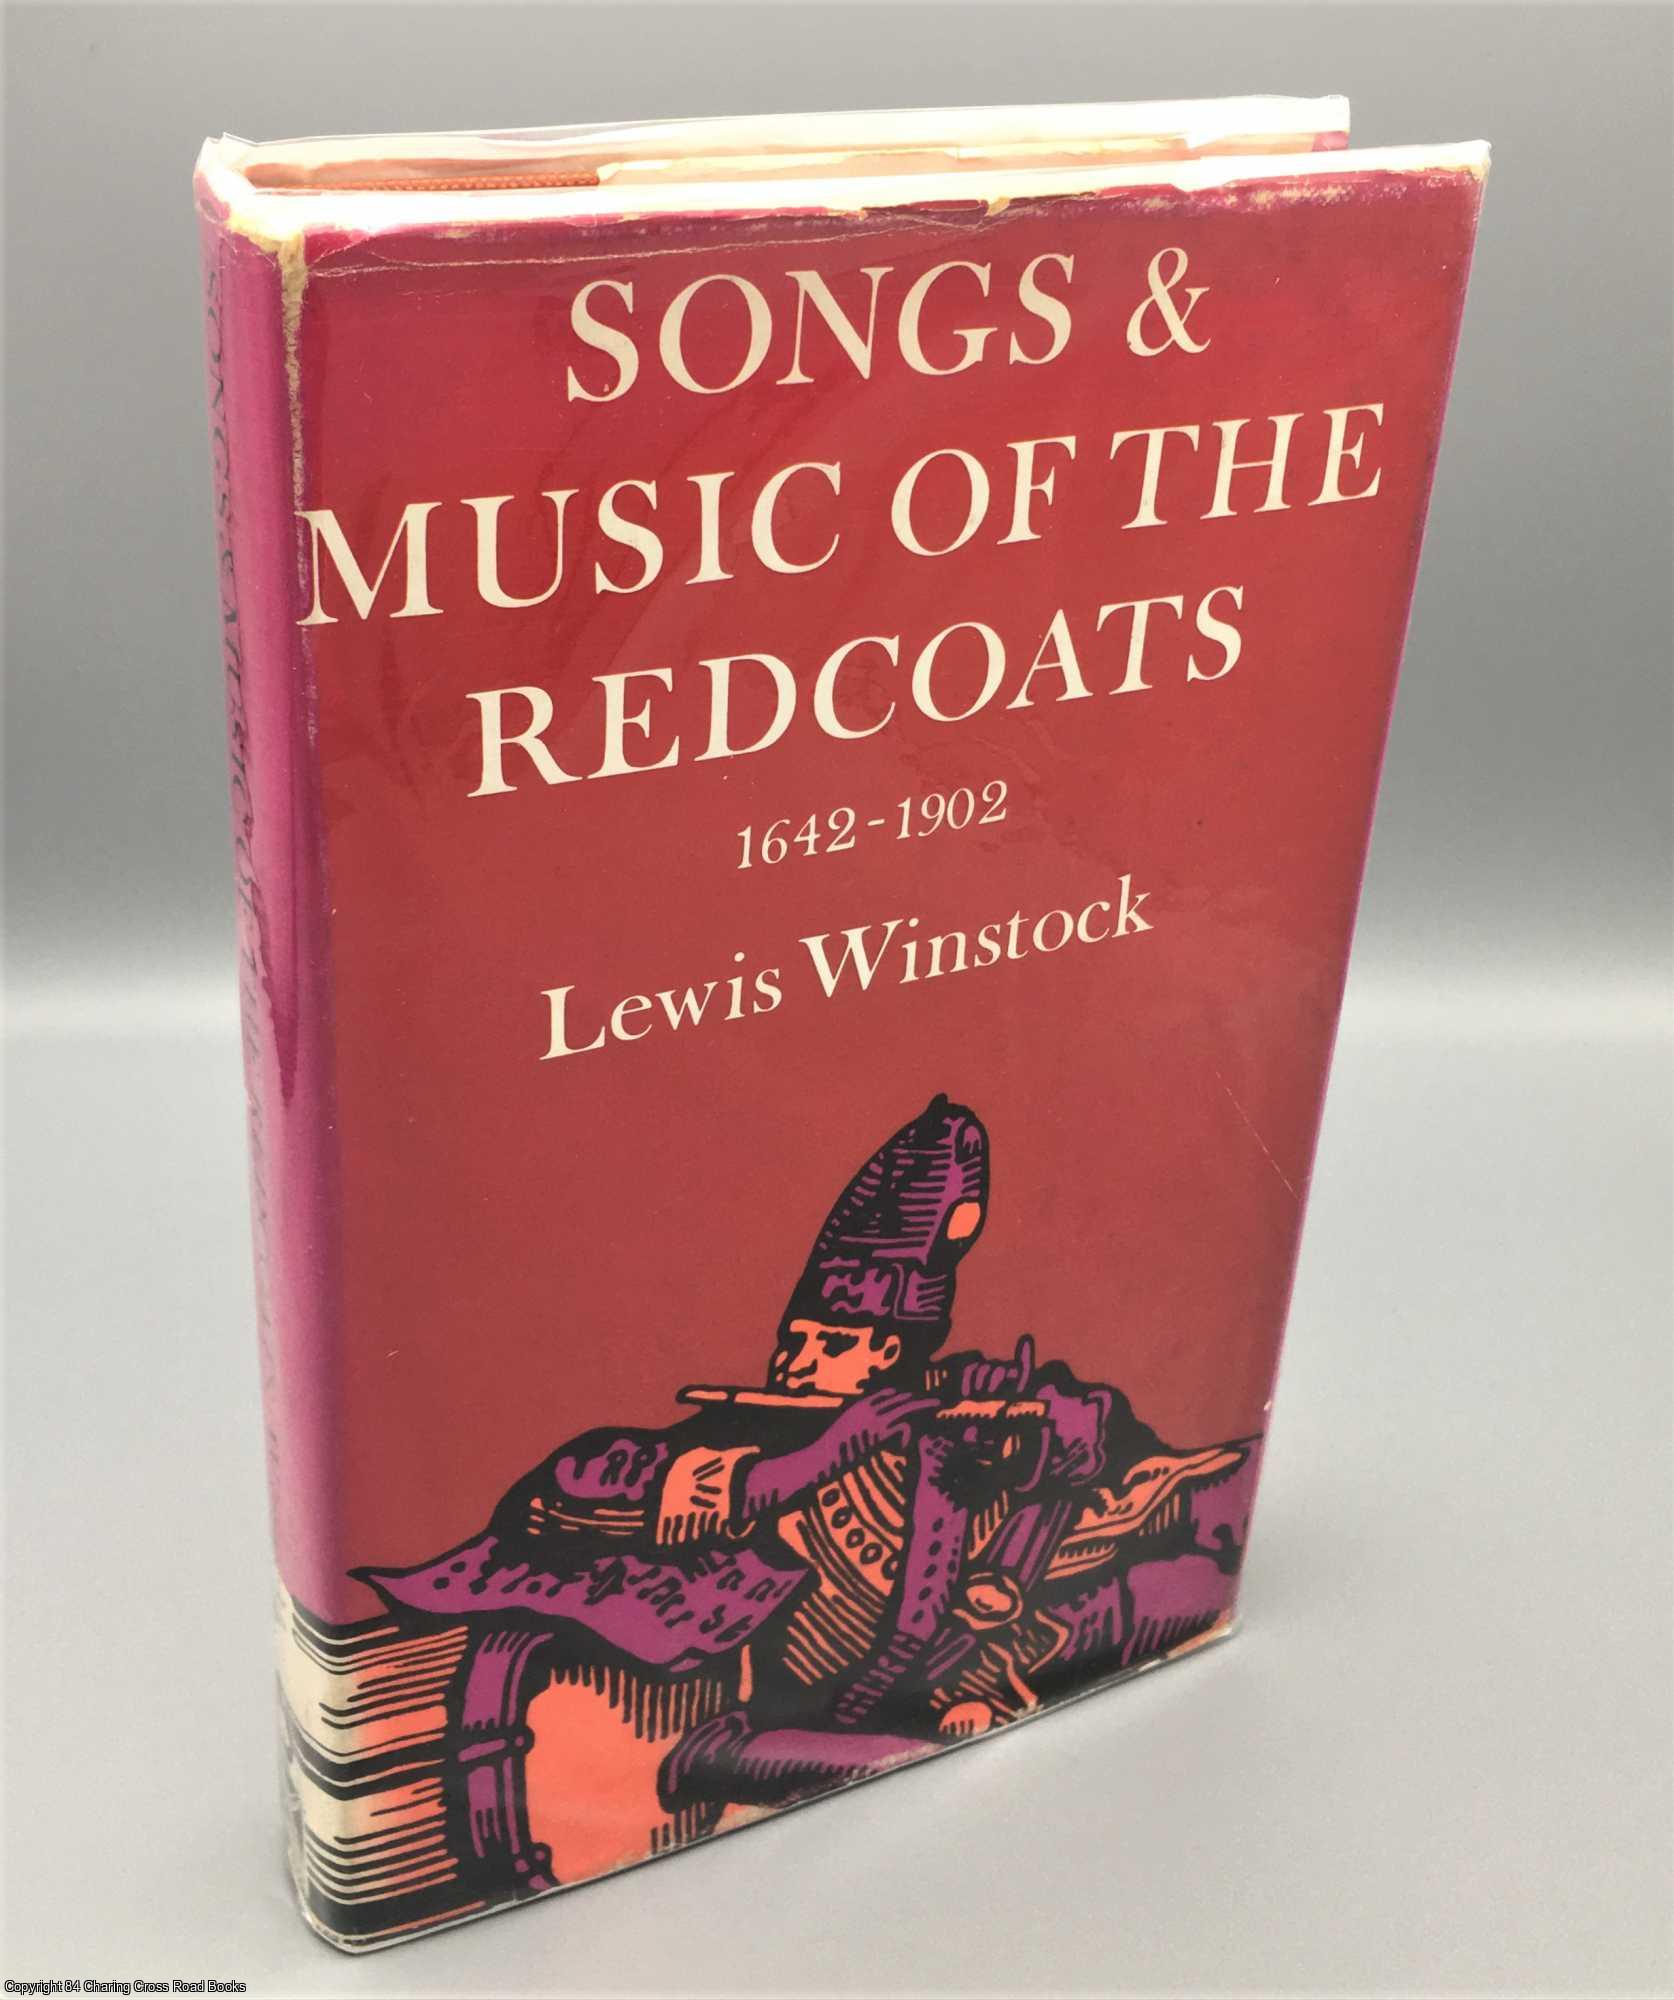 Winstock, Lewis S. - Songs and Music of the Redcoats: A History of the War Music of the British Army 1642 - 1902